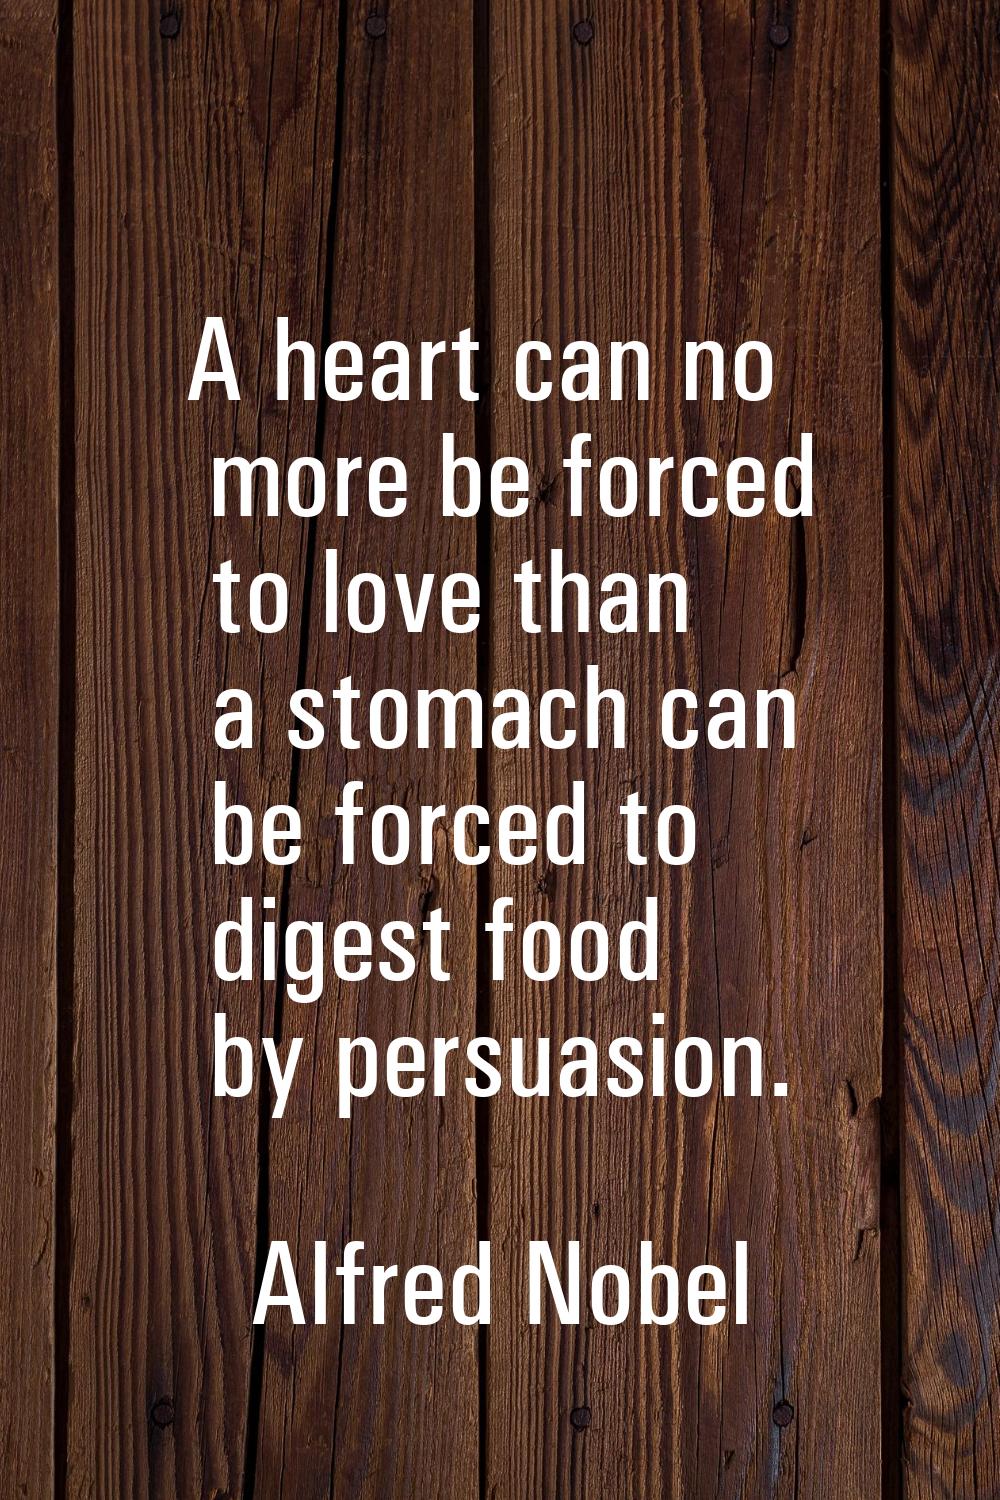 A heart can no more be forced to love than a stomach can be forced to digest food by persuasion.